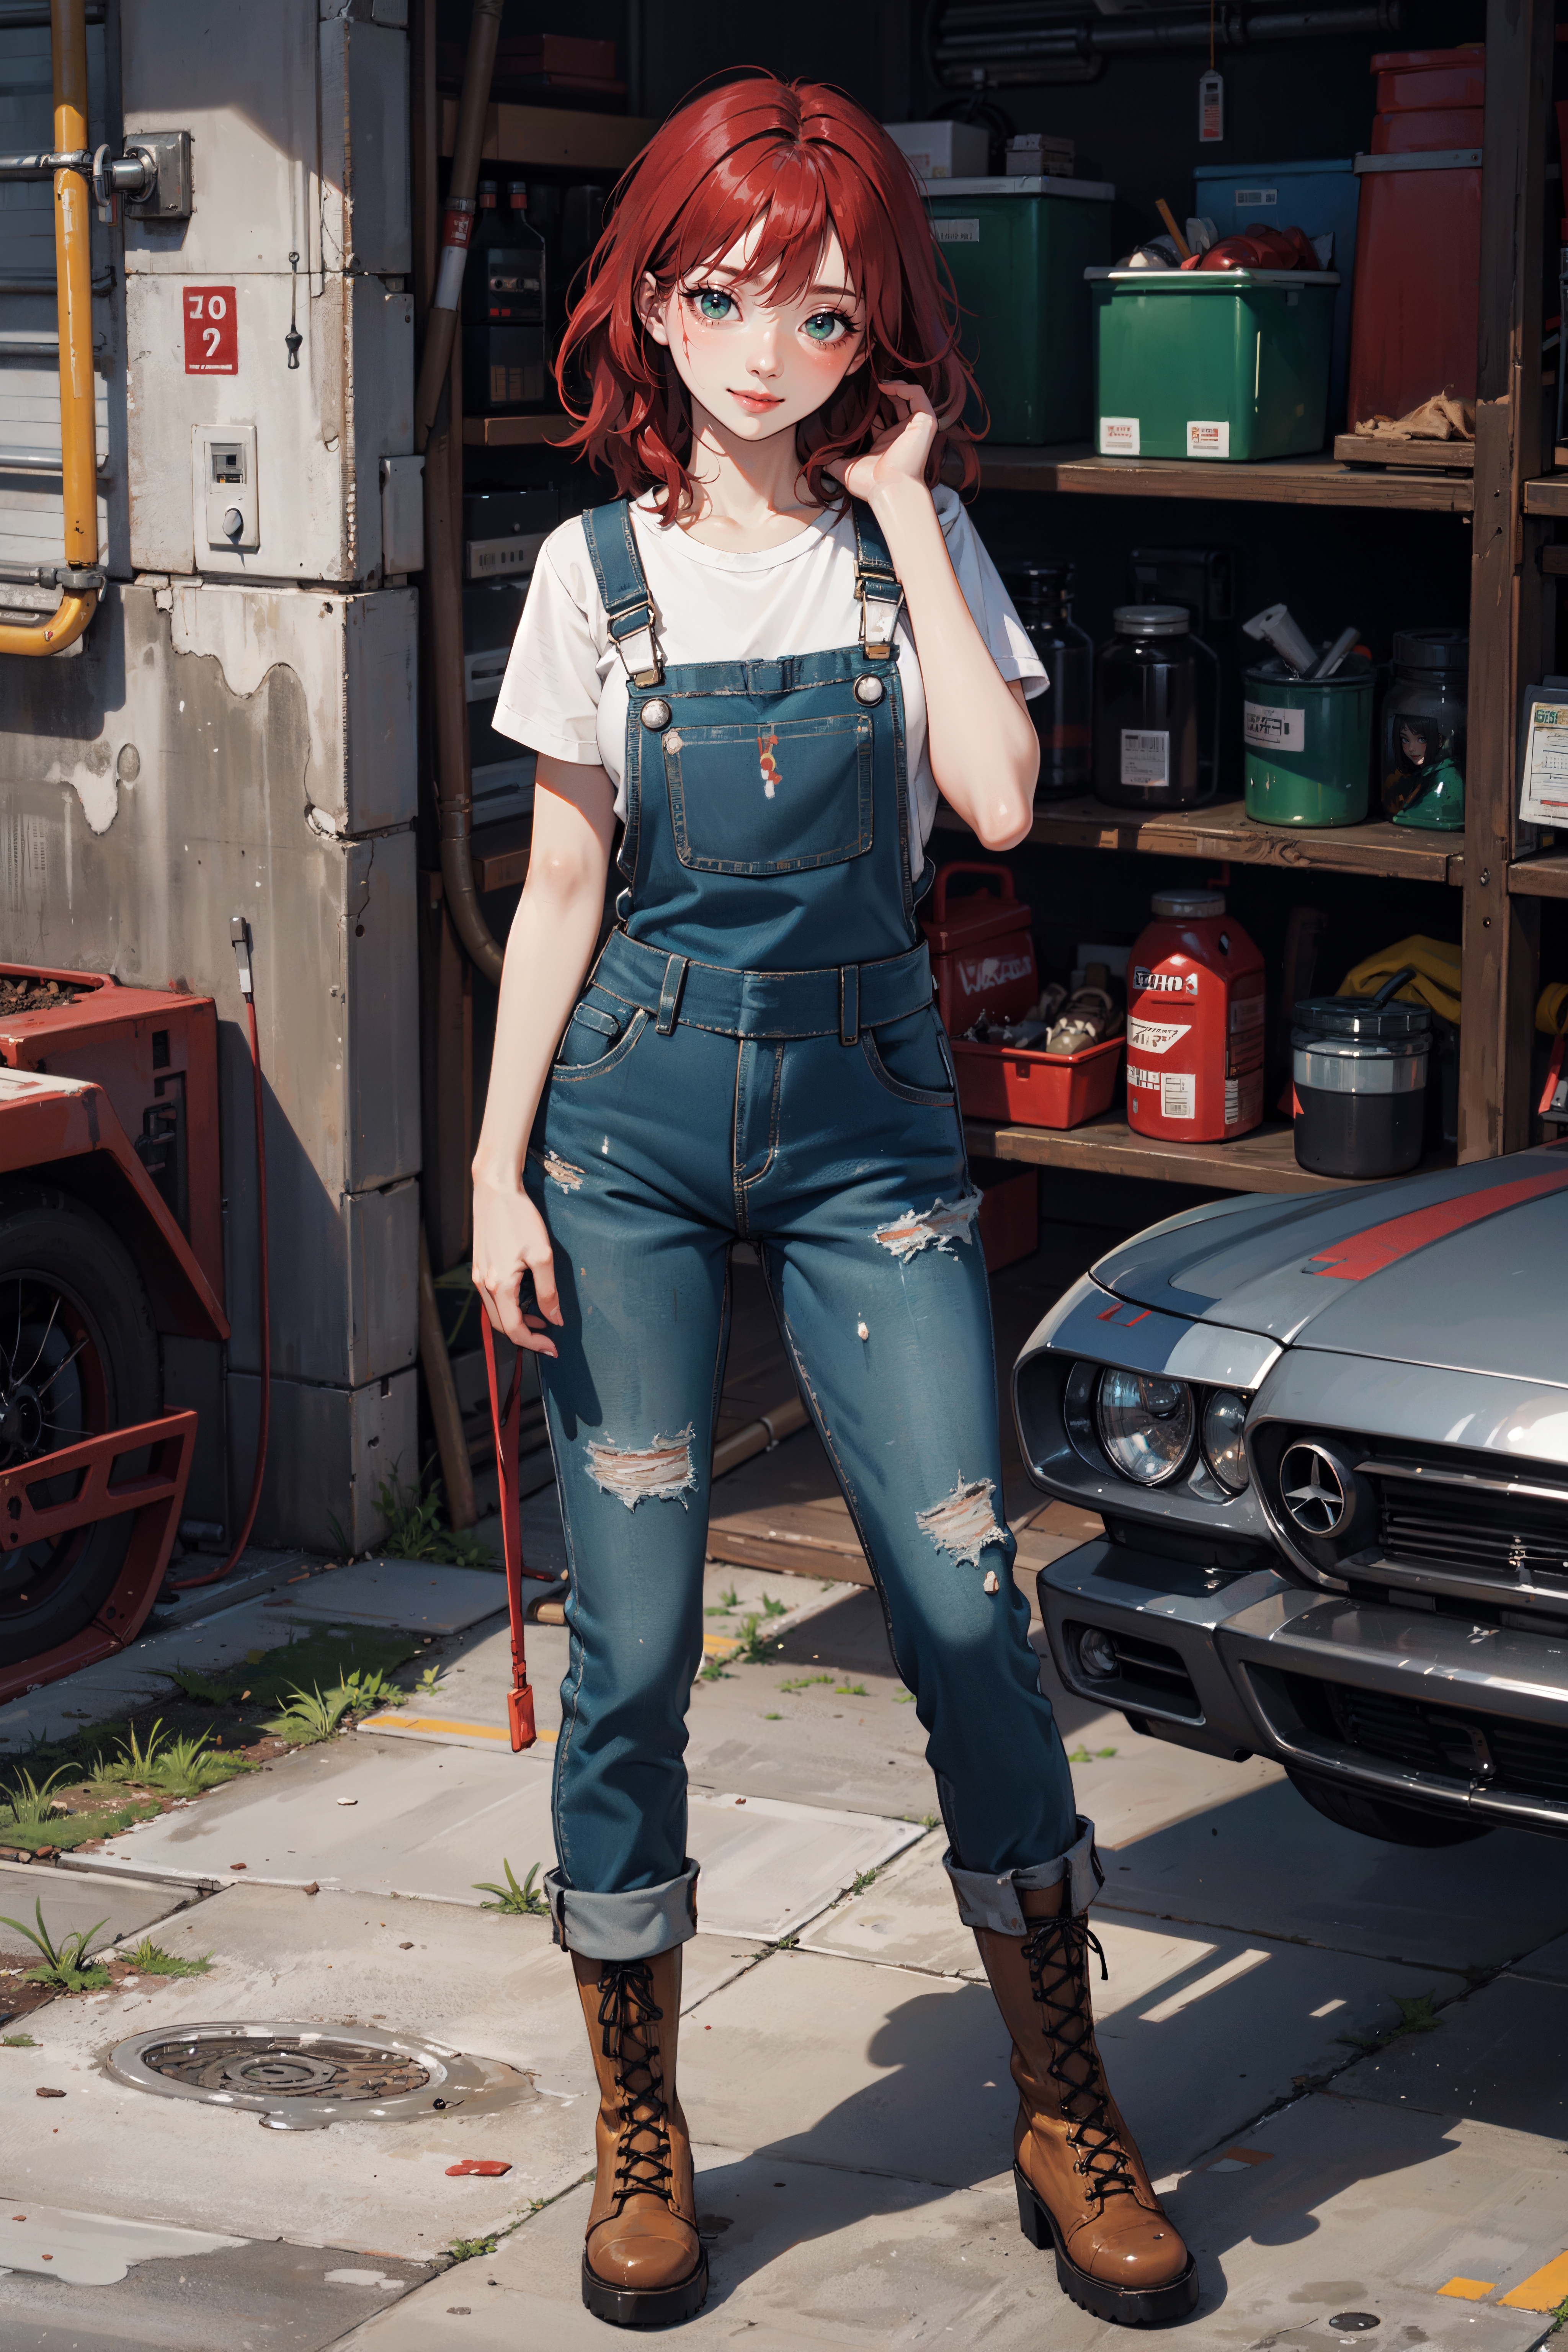 A woman in a denim overalls and a white shirt standing near a car.